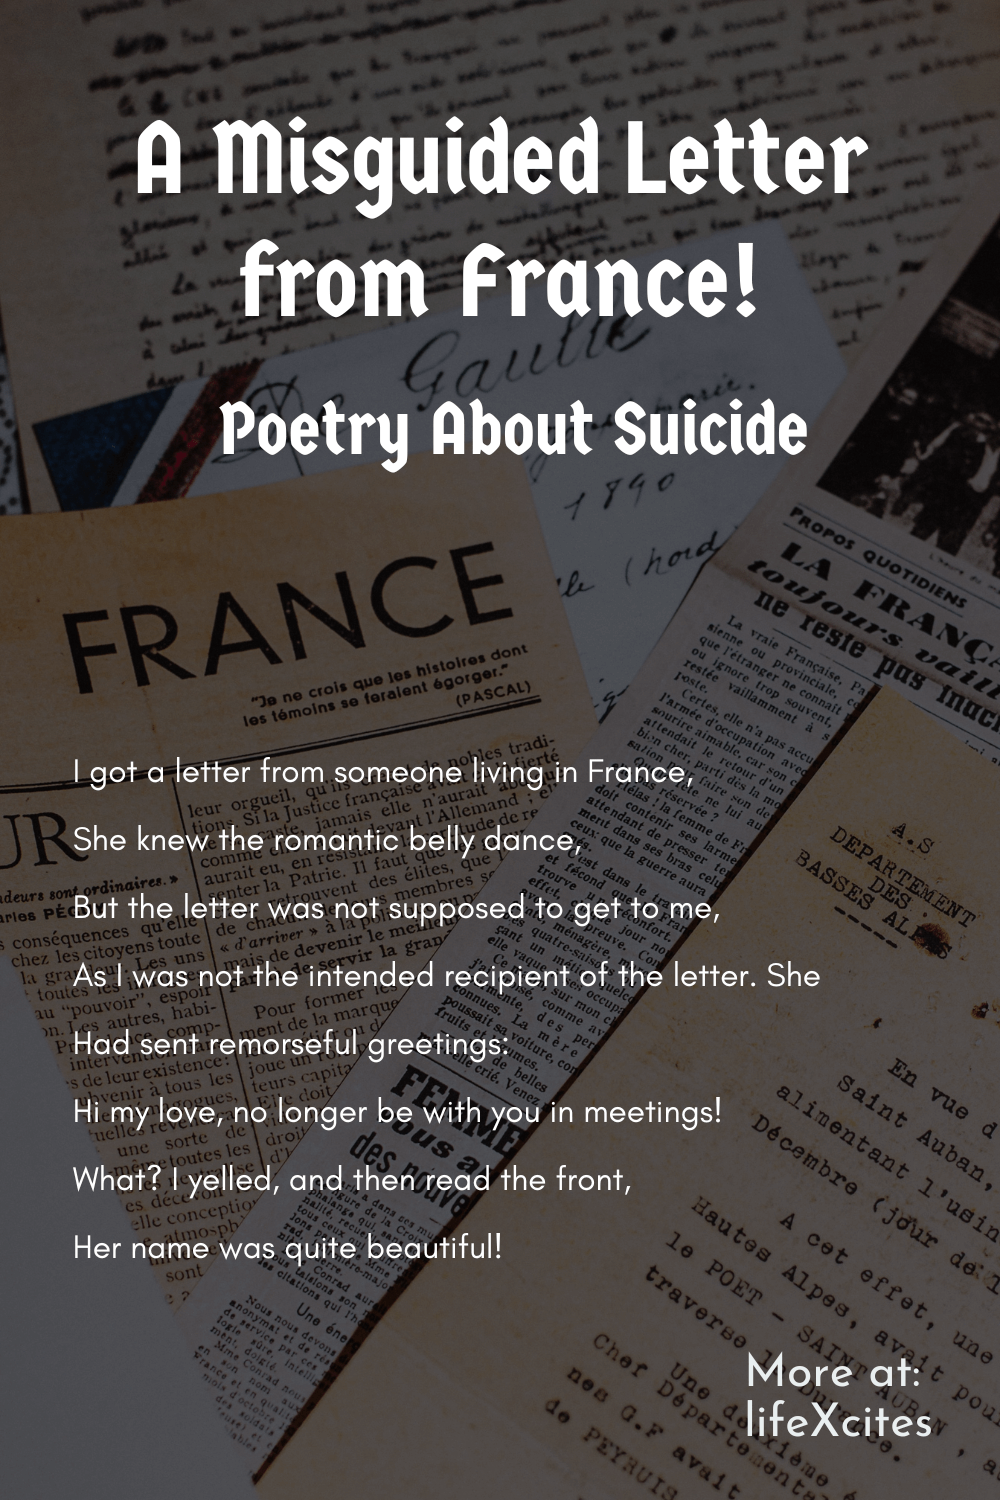 A Misguided Letter from France! Part A – Poetry About Suicide